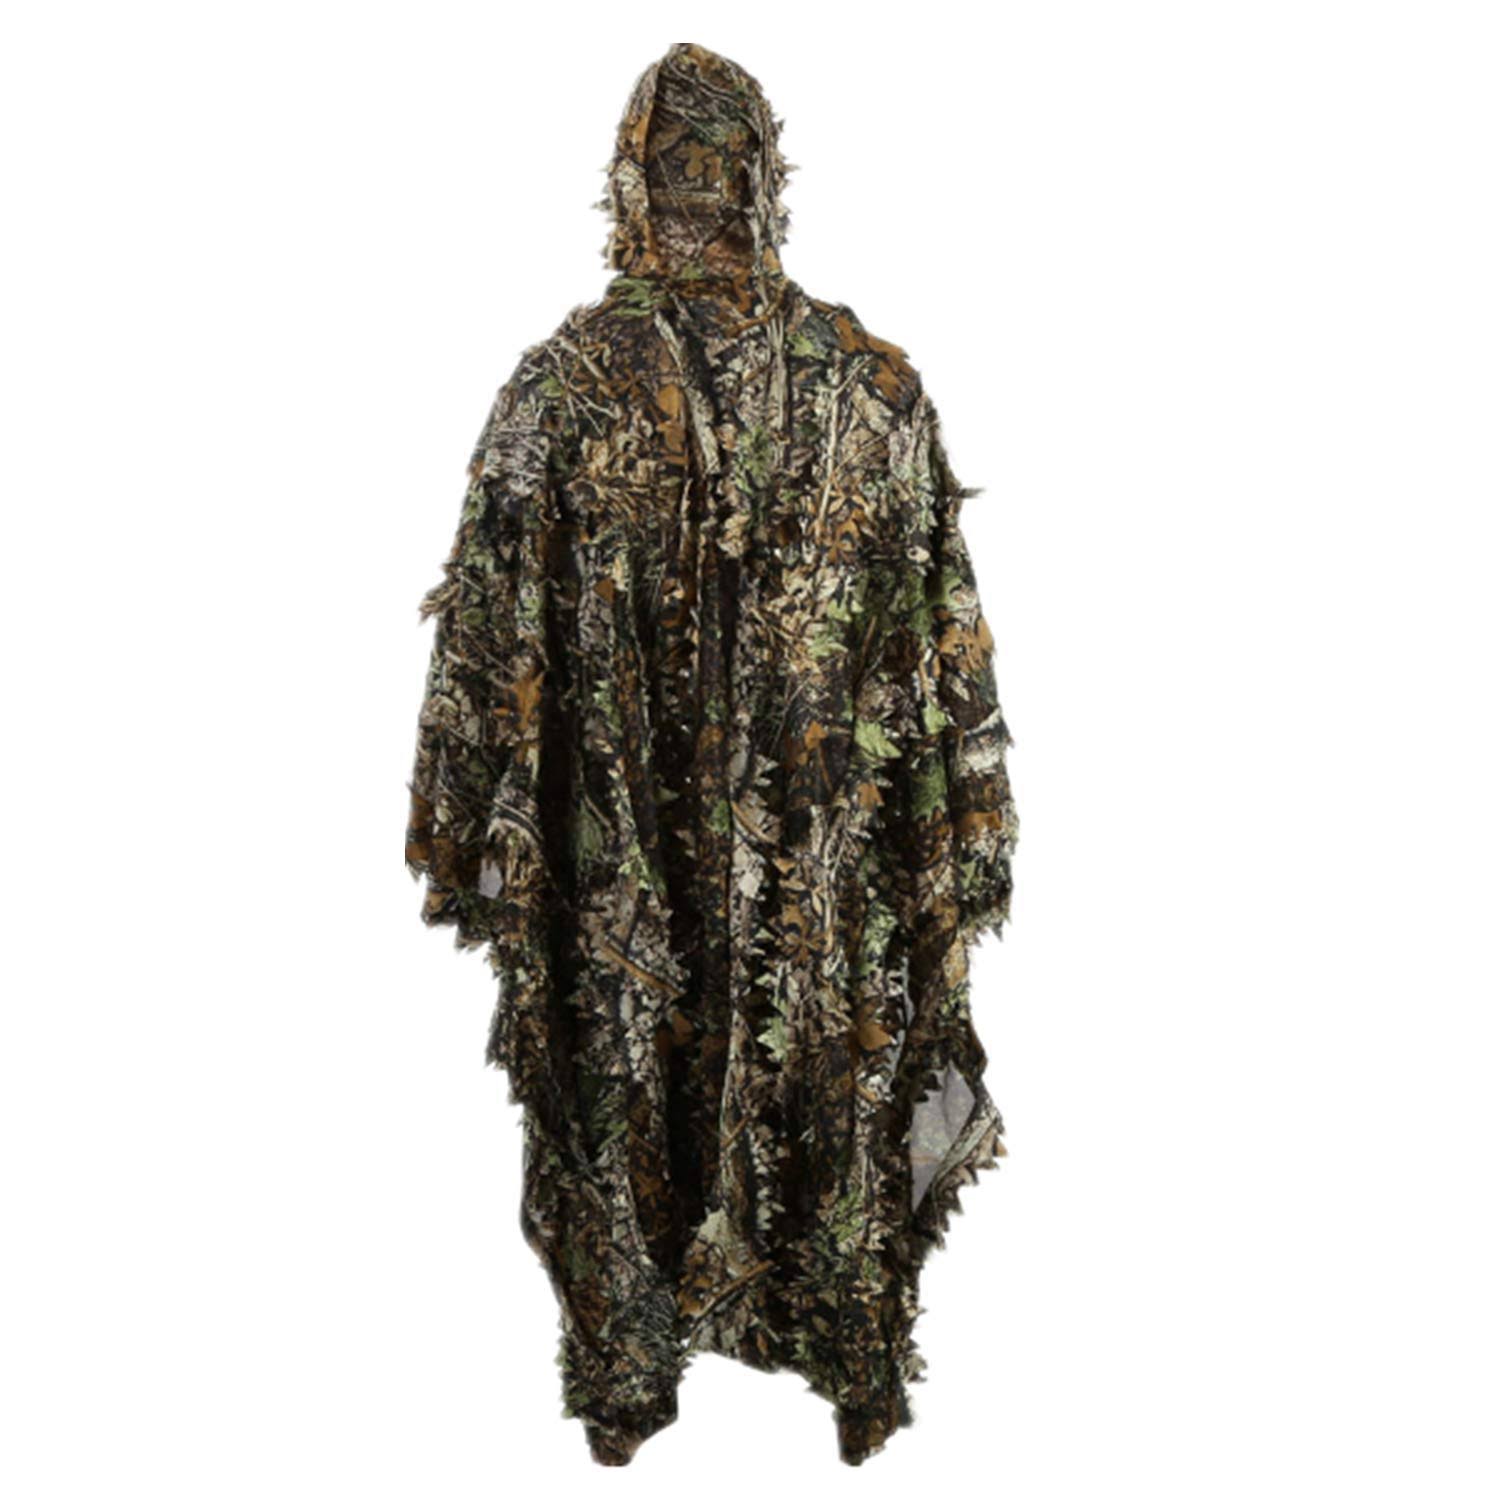 Zicac Outdoor 3D Leaves Camouflage Ghillie Poncho Camo Cape Cloak ...